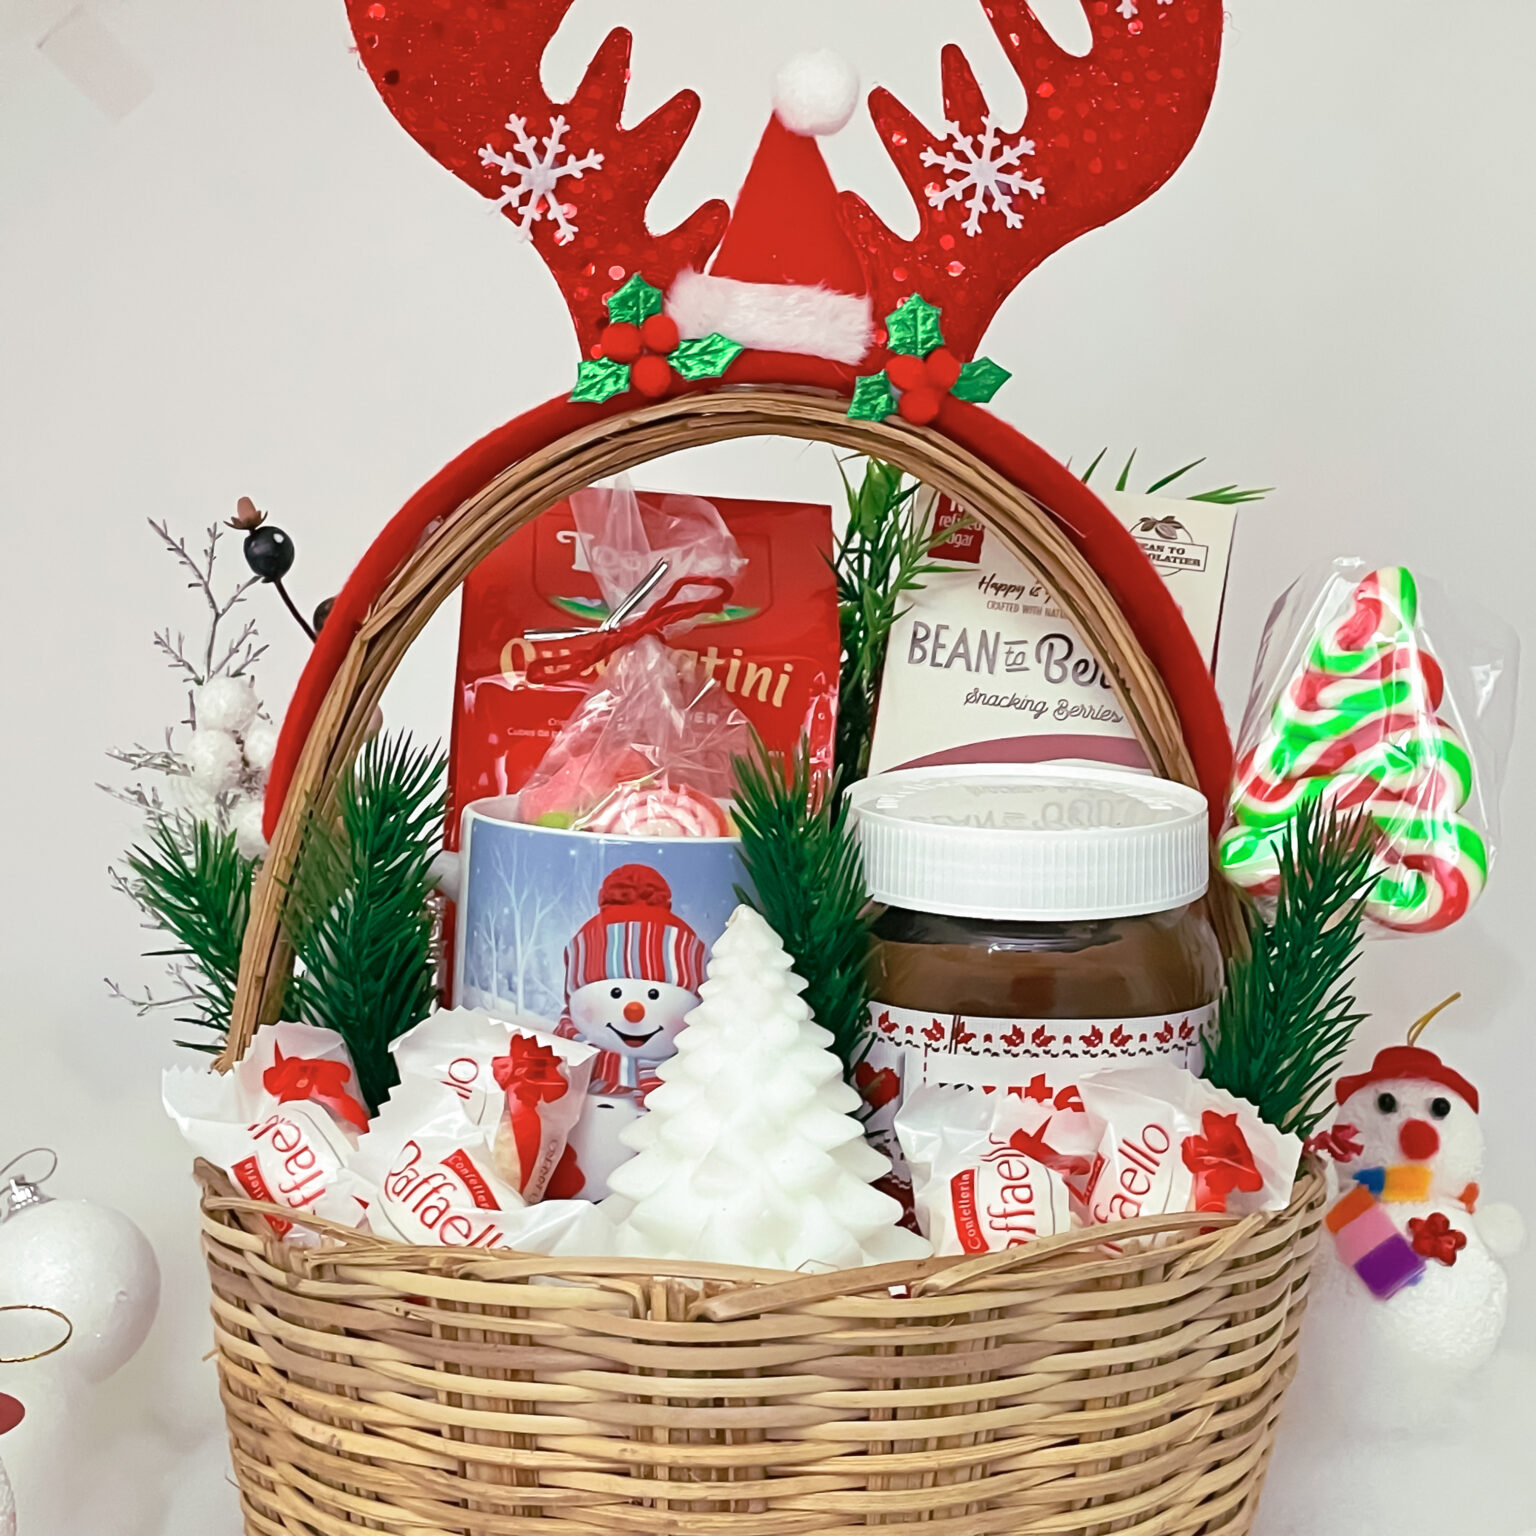 Send Or Buy Holiday Gifts Hamper To Your Loved Ones